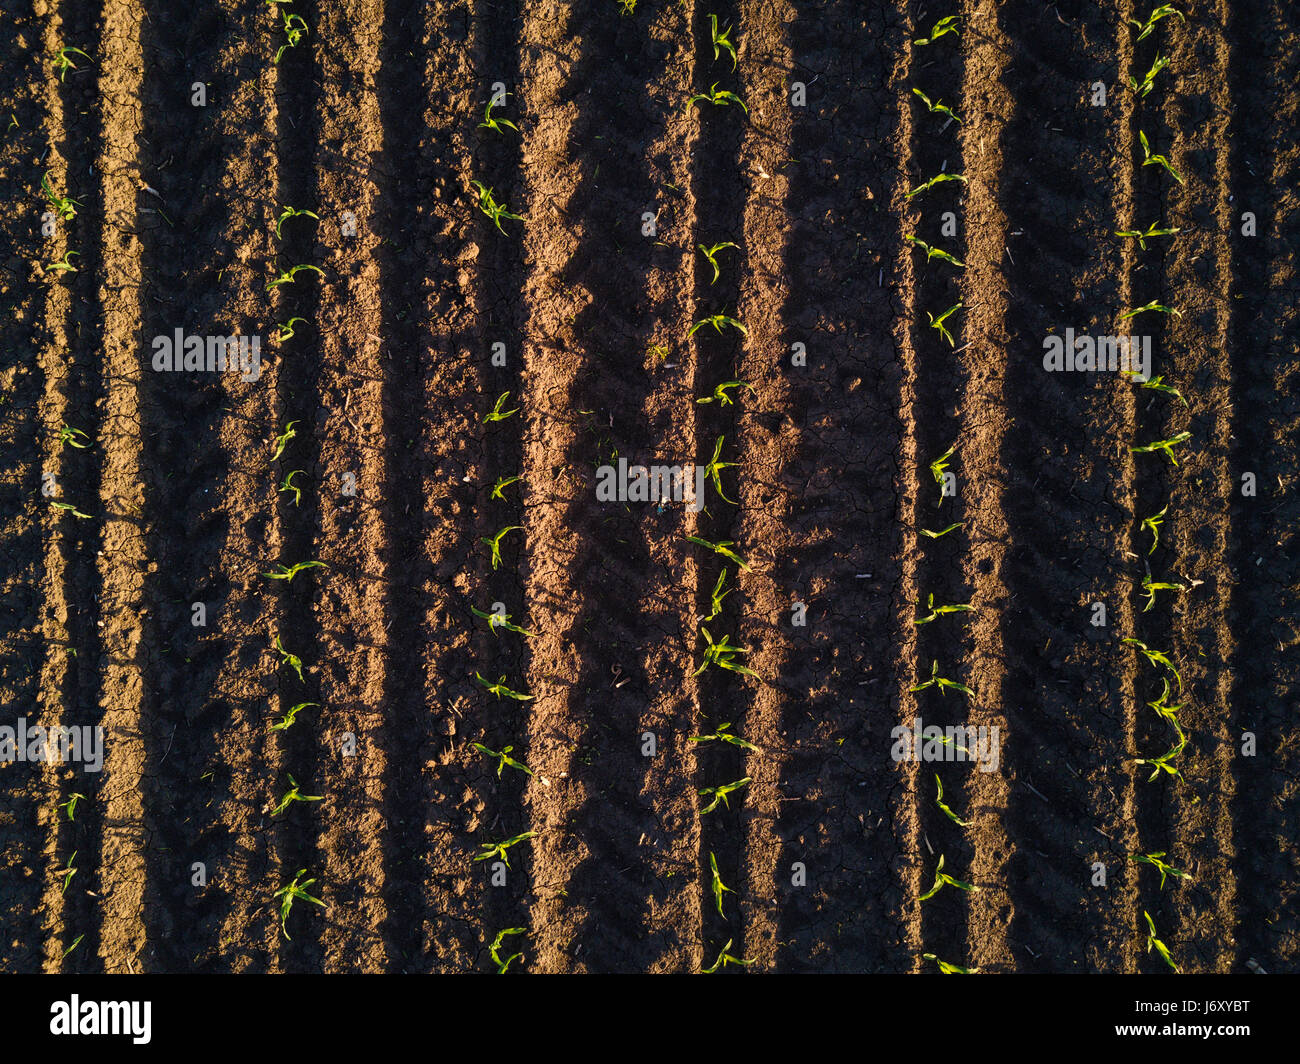 Aerial view of cultivated corn furrows, maize crops in the field, drone pov Stock Photo